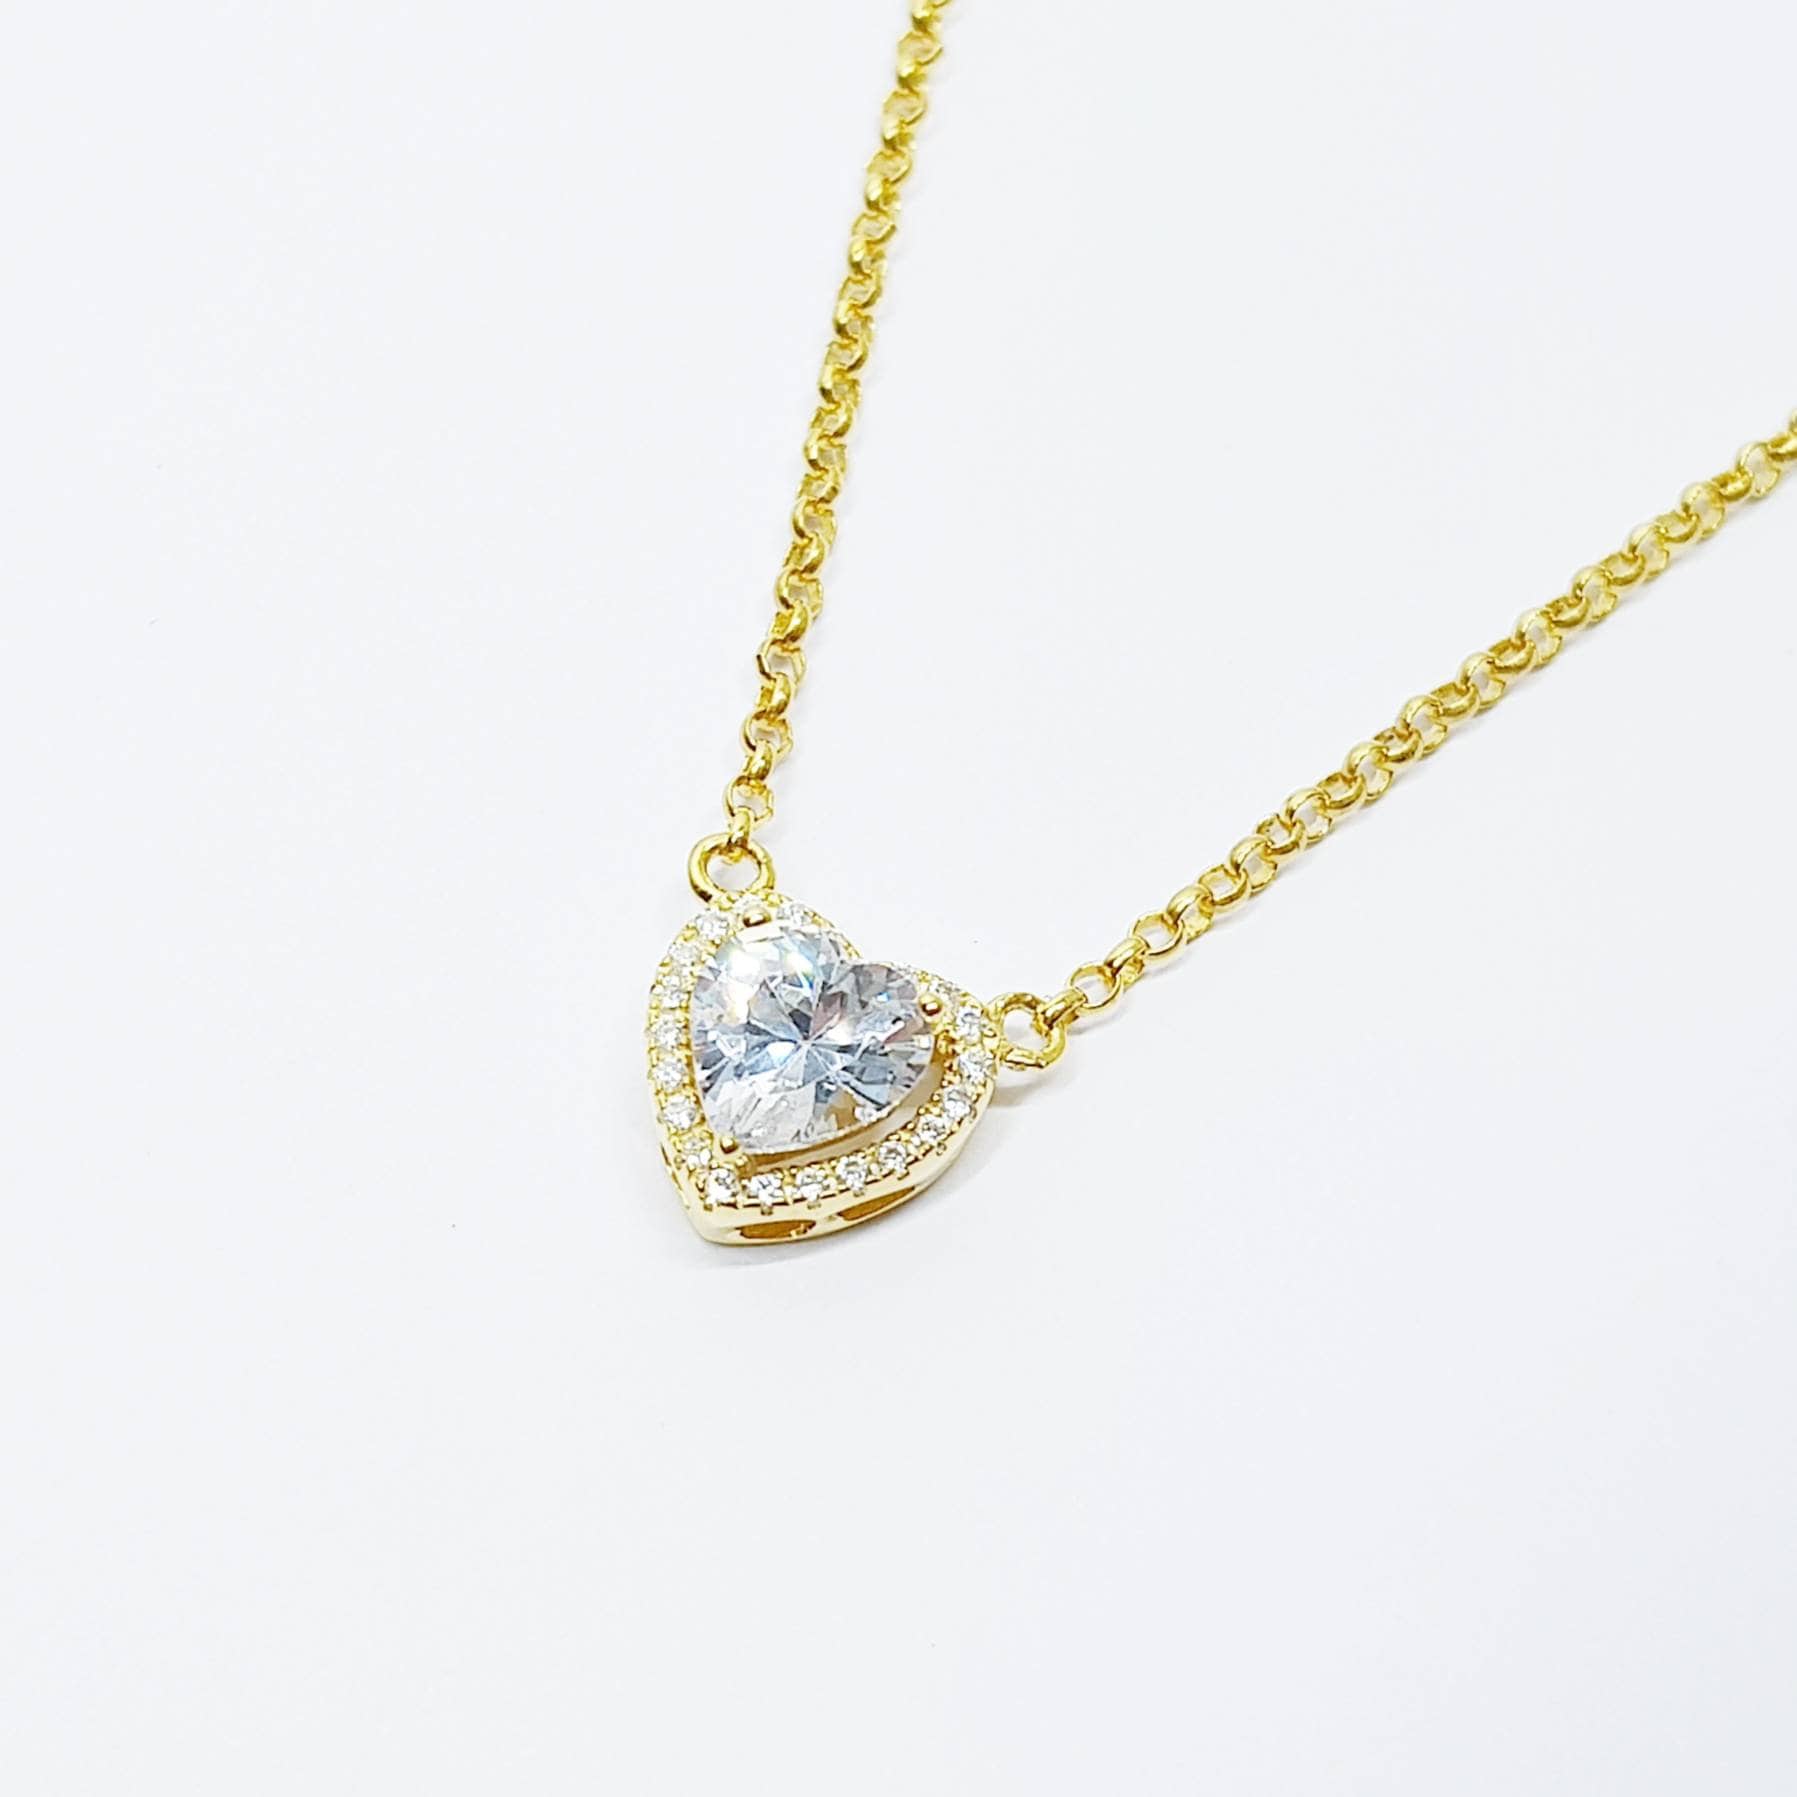 Sterling Silver CZ Heart Necklace, Silver Heart Diamond Necklace, Silver Heart Necklace, Cute Everyday Dainty Necklace